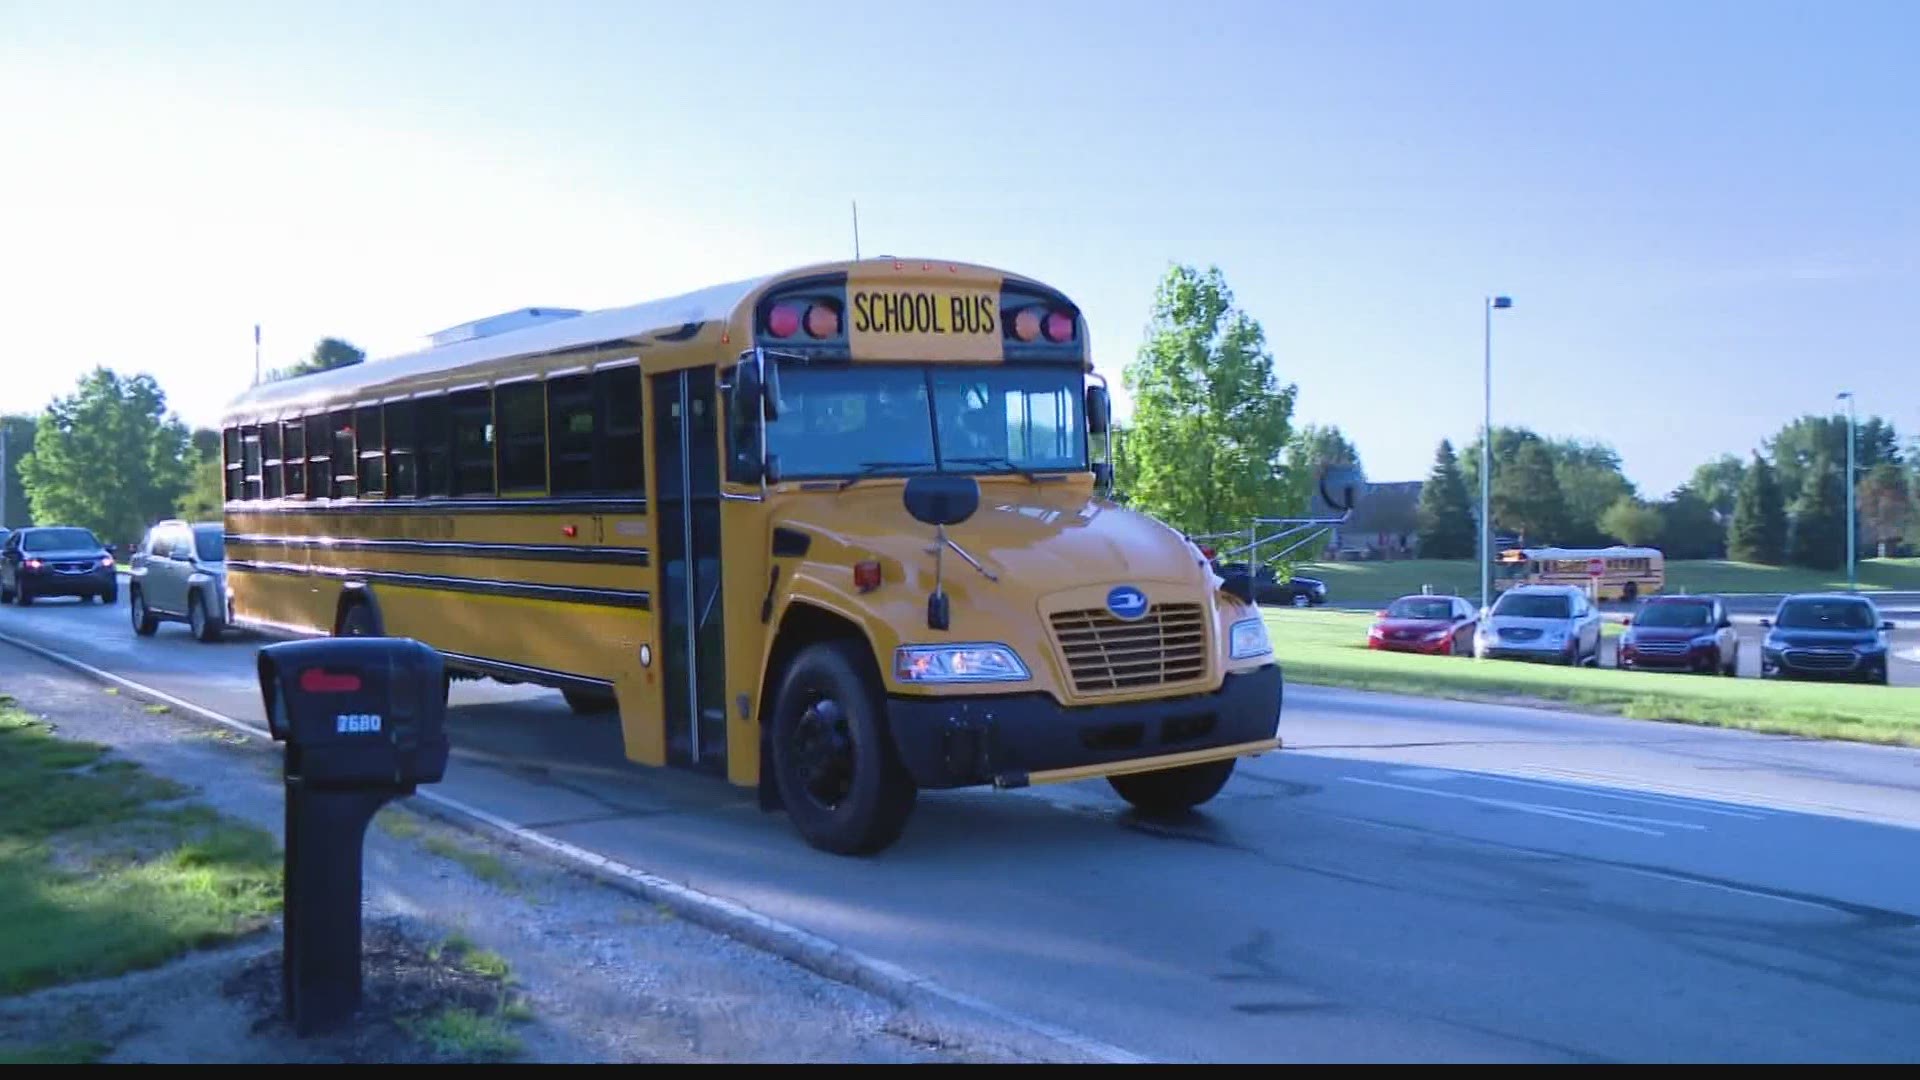 New tool helps determine which students and staff might have been exposed to COVID-19 on the school bus.